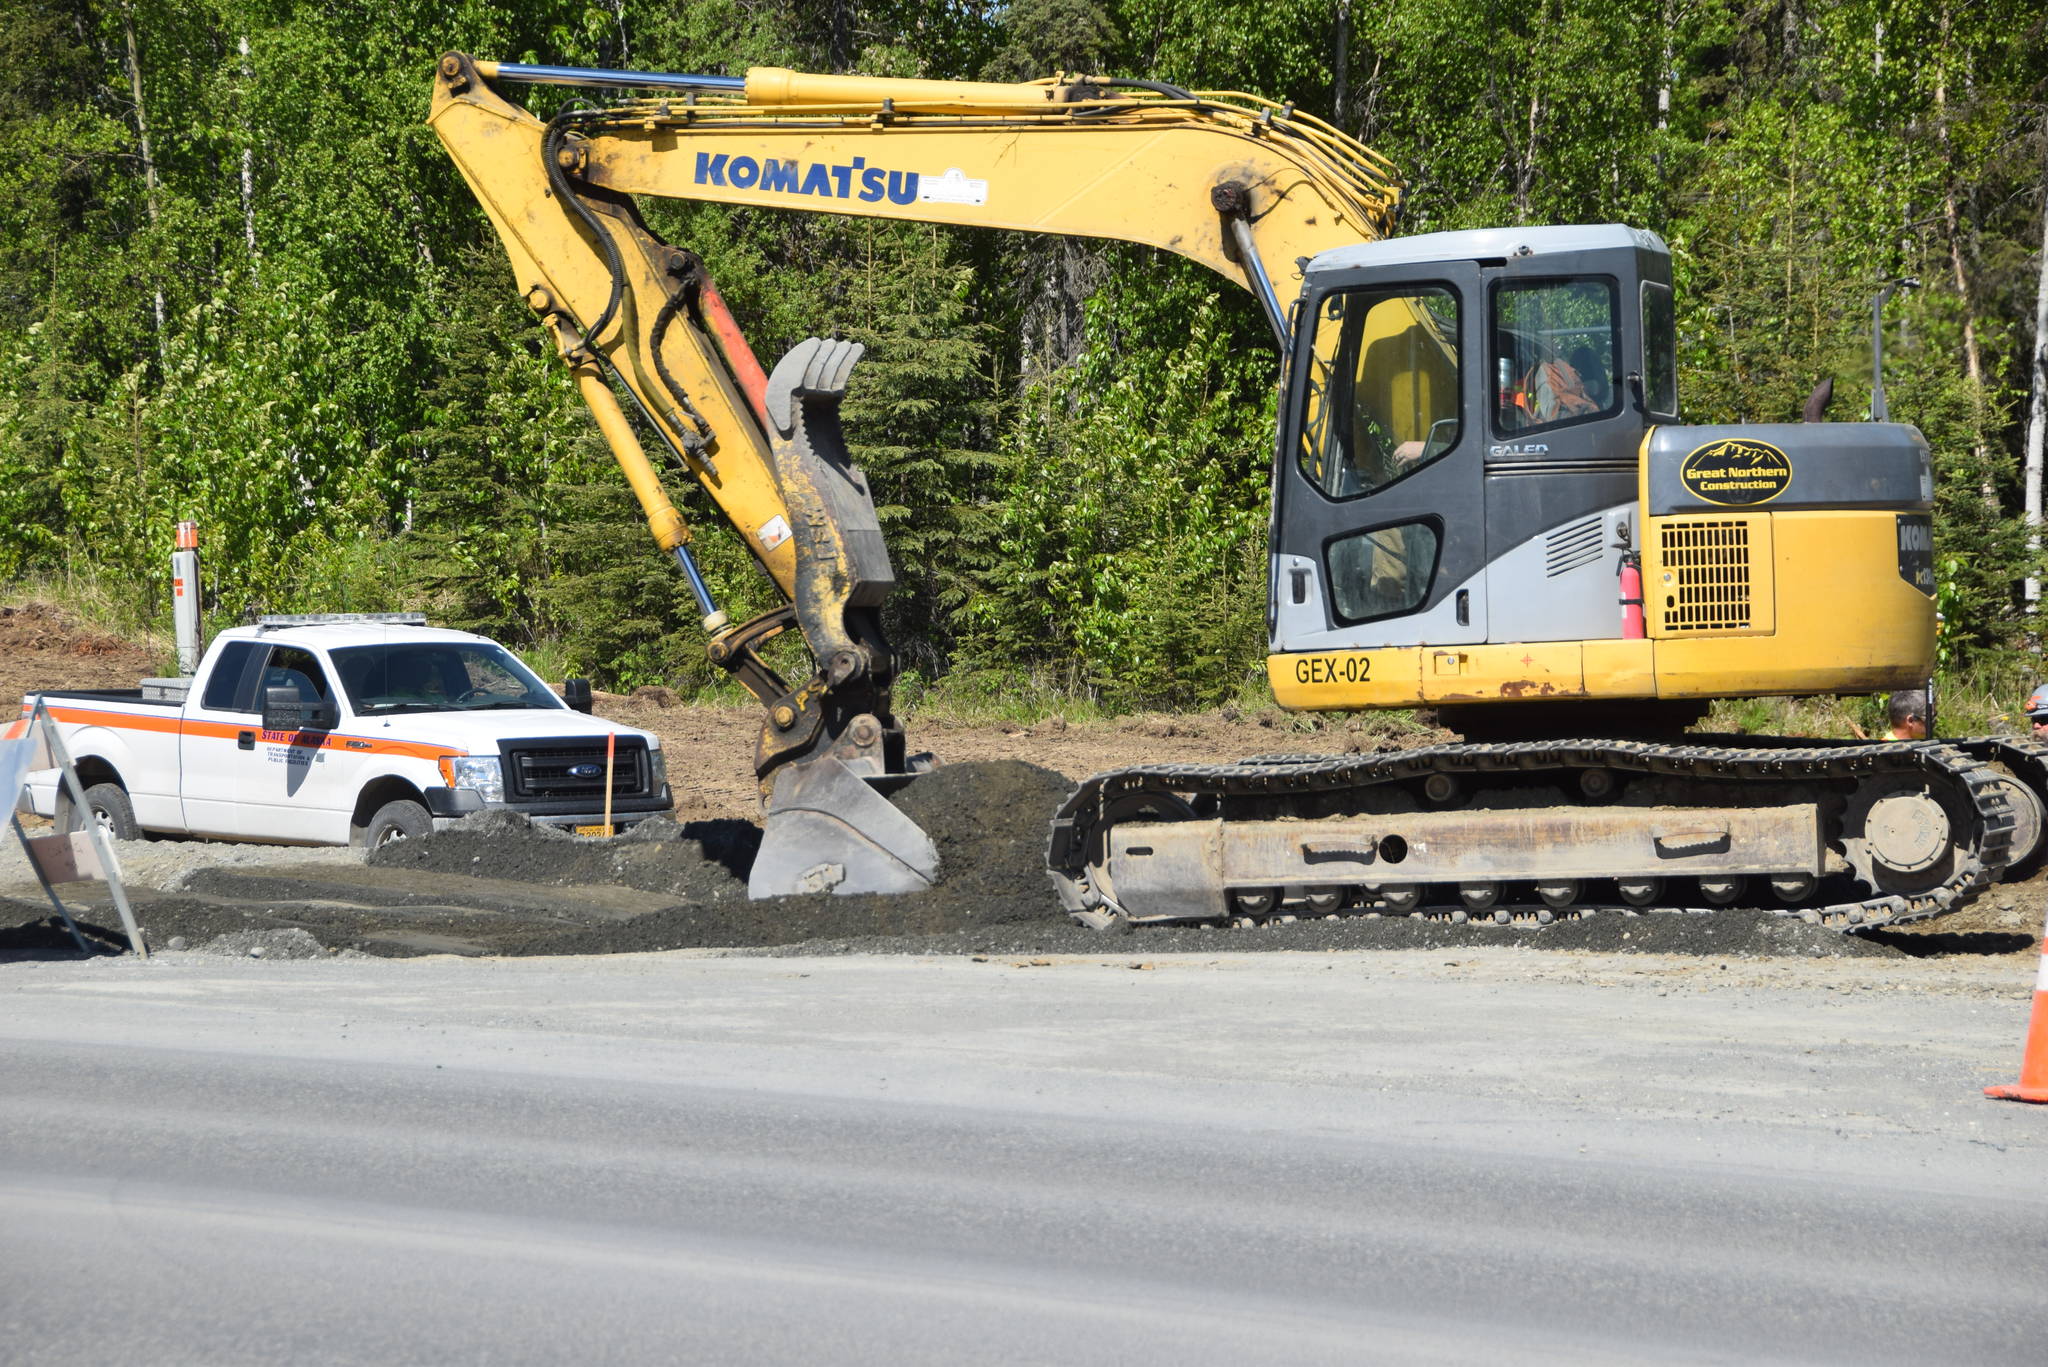 A construction crew excavates along the Kenai Spur Highway on Tuesday, June 4. (Photo by Brian Mazurek/Peninsula Clarion)